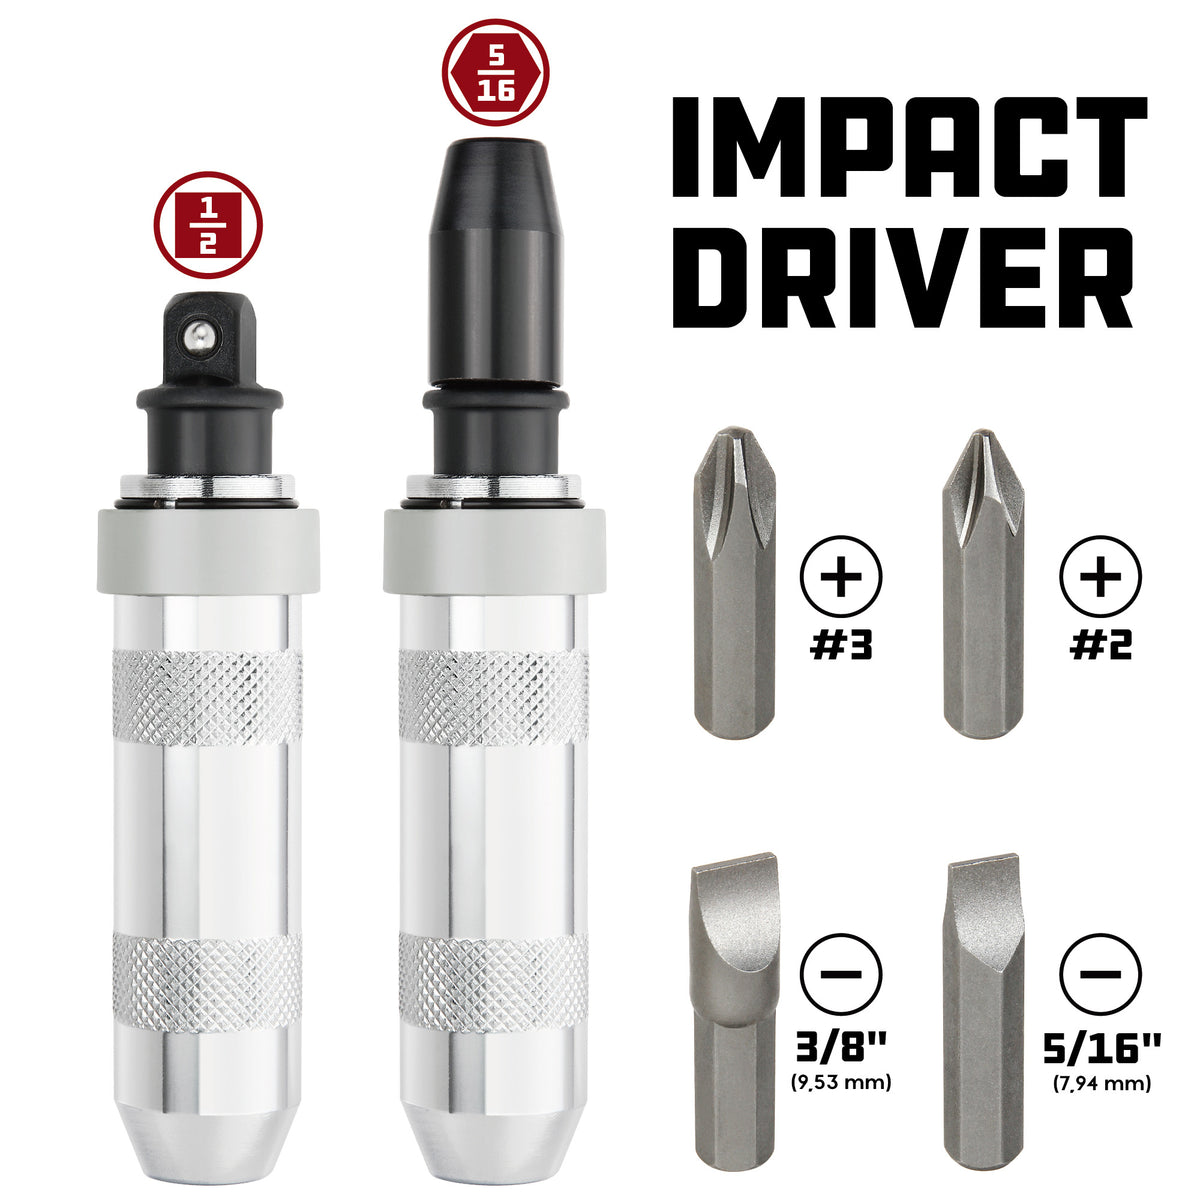 1/2 in. Dr. Impact Driver